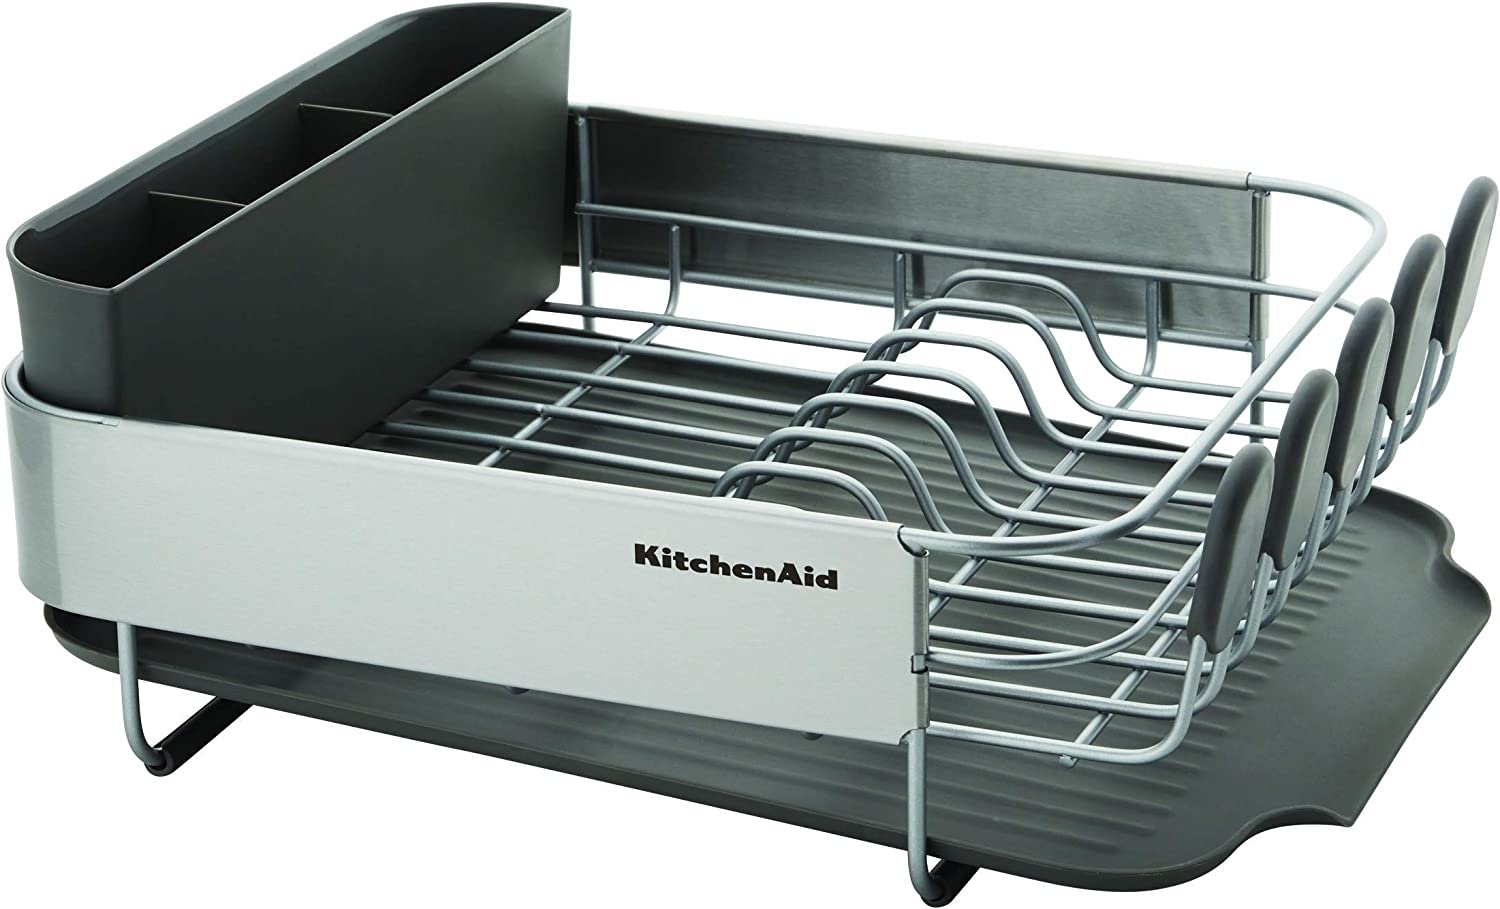 KitchenAid Full Size Dish Rack, Light Grey Import To Shop ×Product customization General Description Gallery Reviews Variations